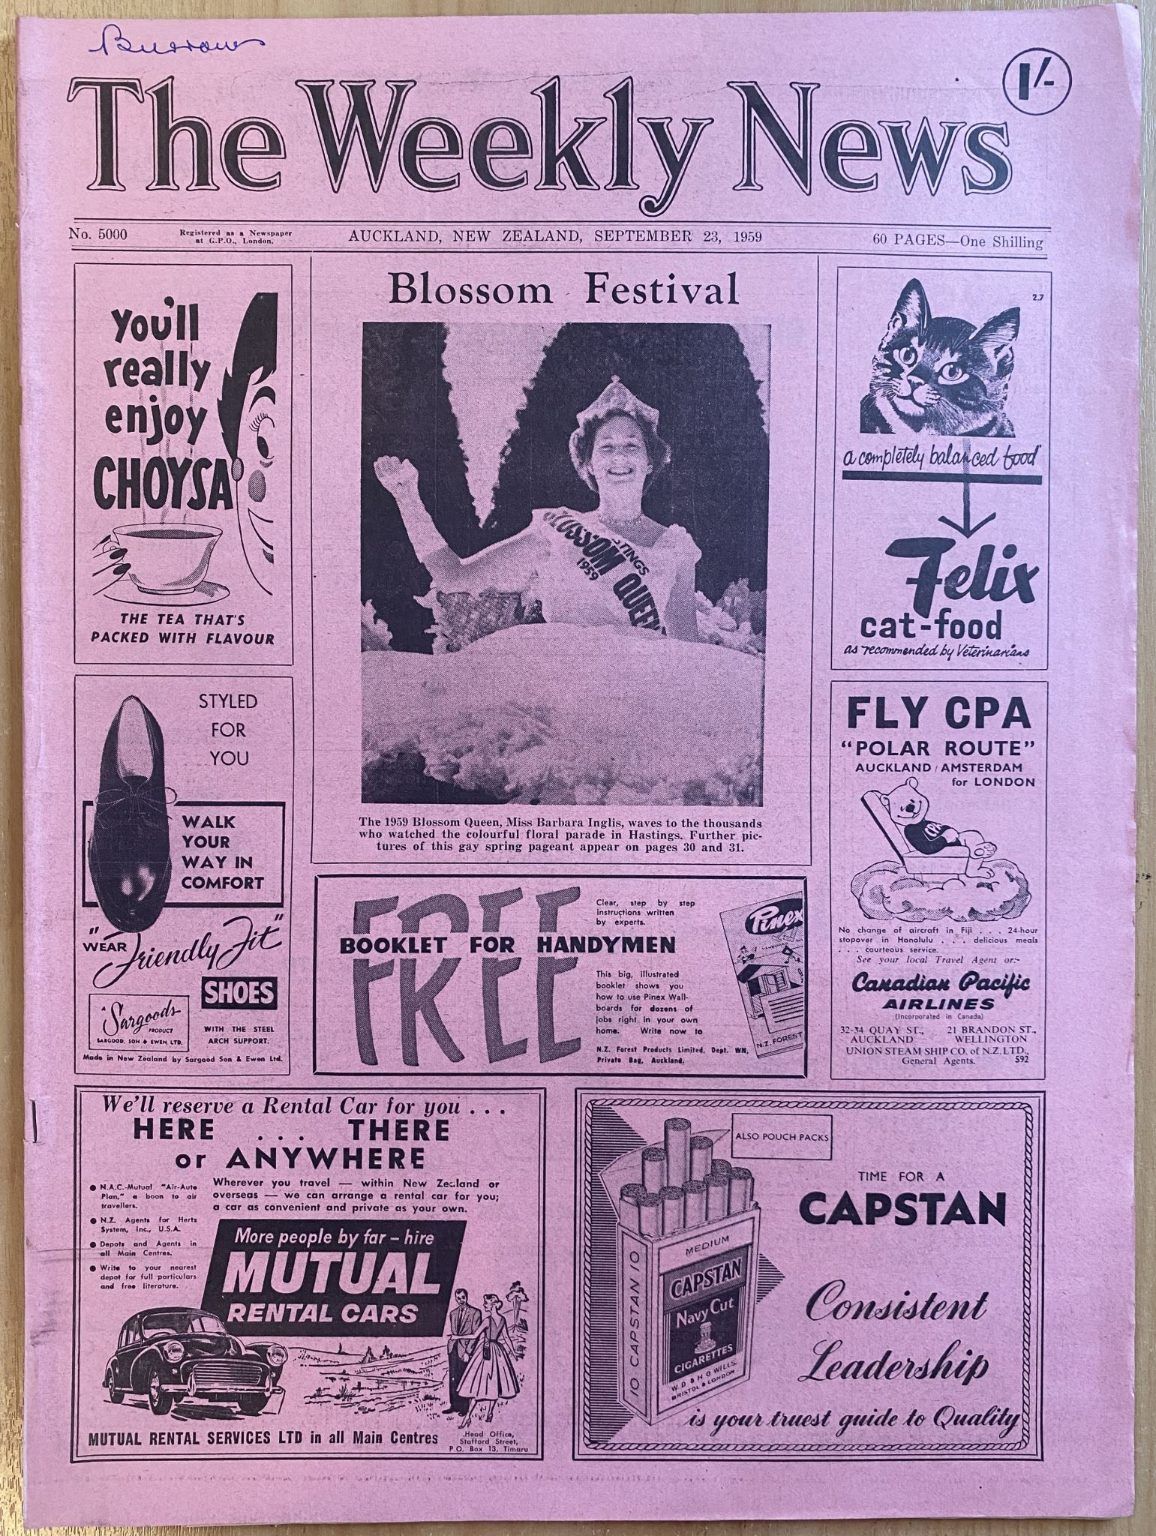 OLD NEWSPAPER: The Weekly News - No. 5000, 23 September 1959